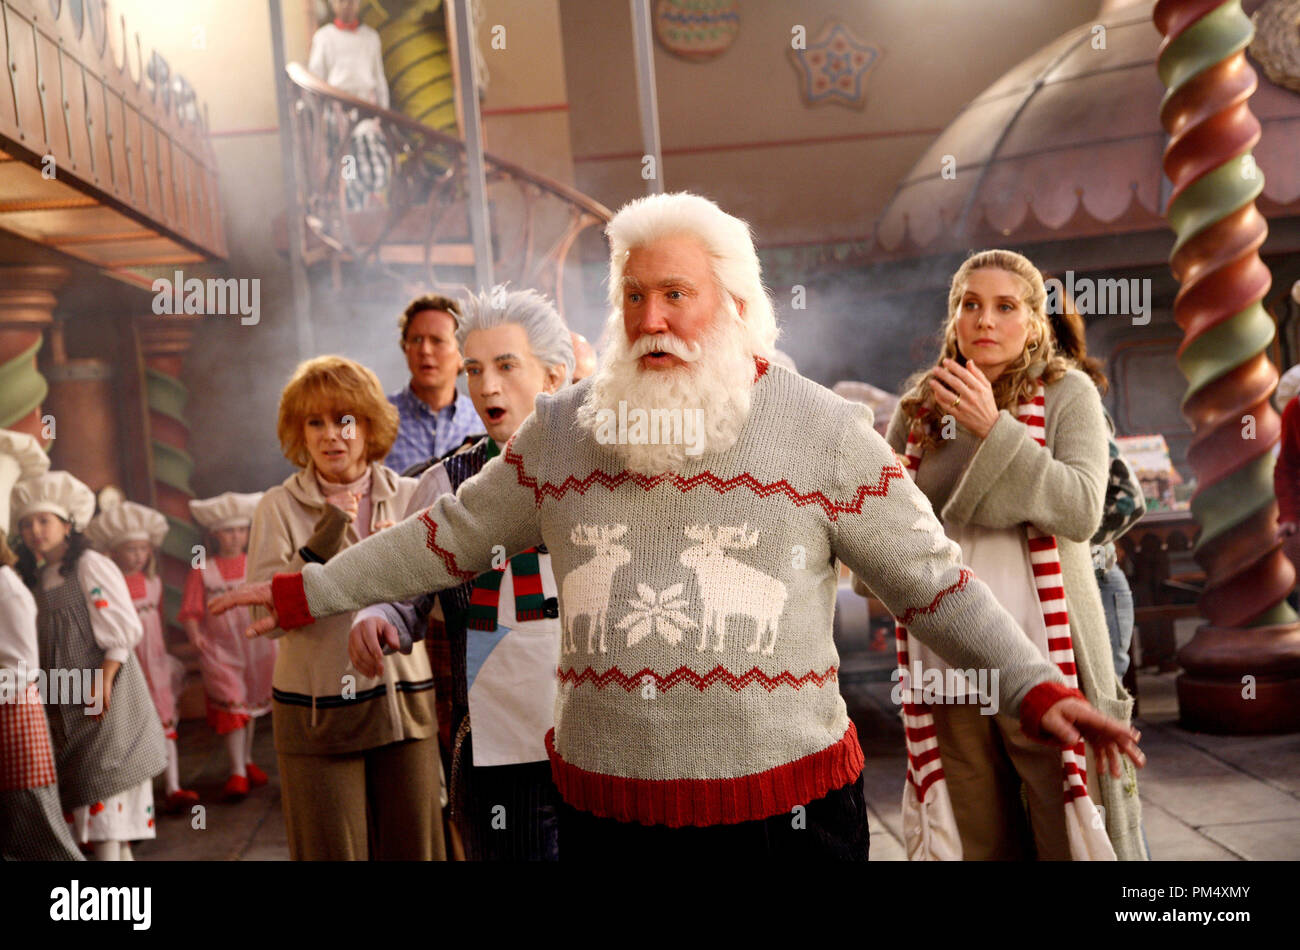 Studio Publicity Still from 'The Santa Clause 3: The Escape Clause' Ann-Margret, Judge Reinhold, Martin Short, Tim Allen, Elizabeth Mitchell © 2006 Disney Enterprises, Inc. Photo credit: Joseph Lederer   File Reference # 307372597THA  For Editorial Use Only -  All Rights Reserved Stock Photo